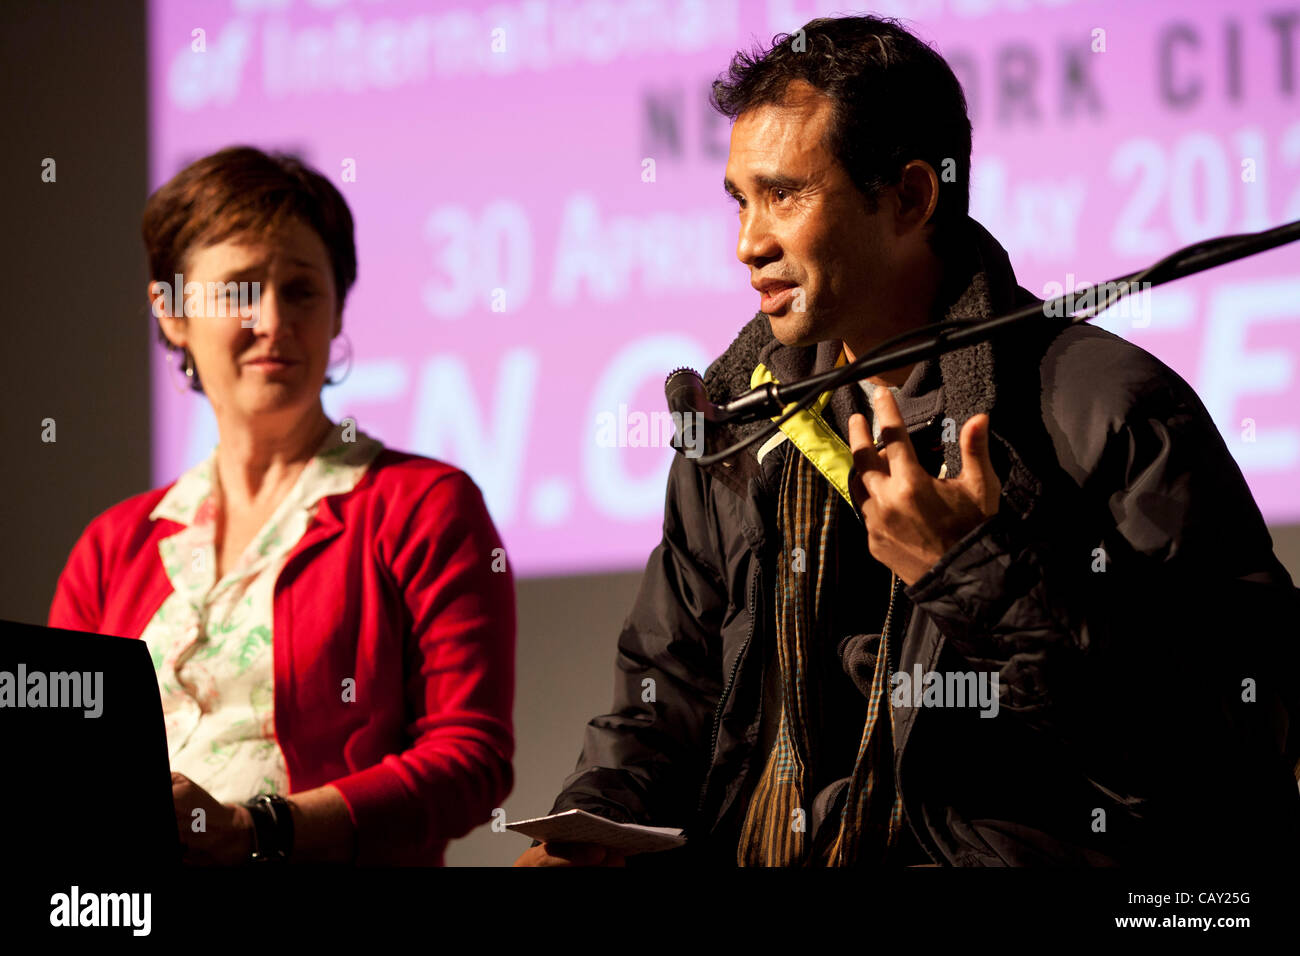 Panel on Children's Rights at Pen World Voices Festival, New York, NY, May 5, 2012, with co-authors Patricia McCormack (L) and former Cambodian child soldier Arn Chorn-Pond (R). Stock Photo